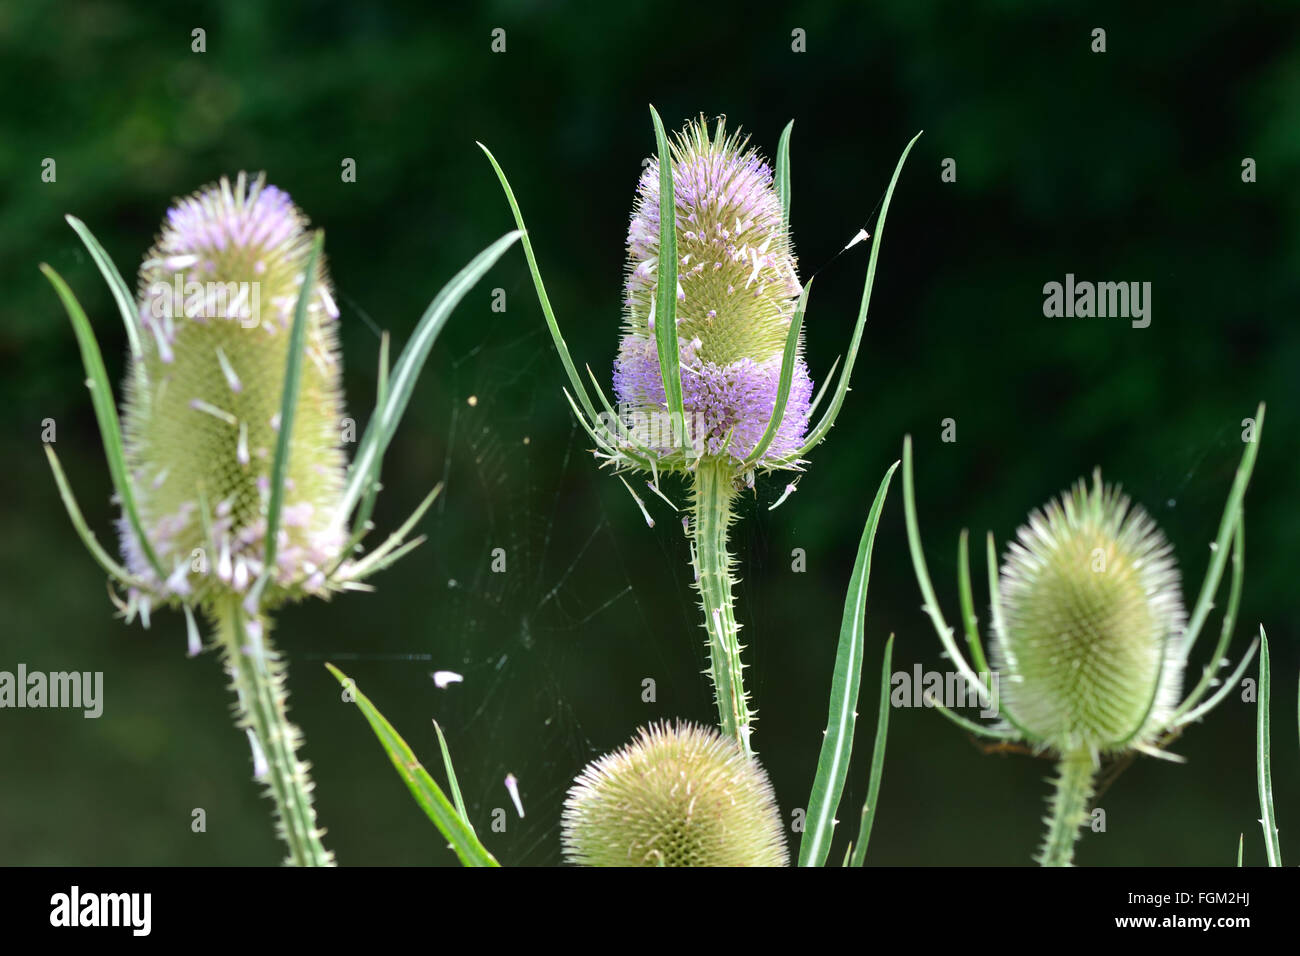 Teasel (Dipsacus fullonum). Purple flowers on the prickly heads on this plant in the family Dipsaceae Stock Photo